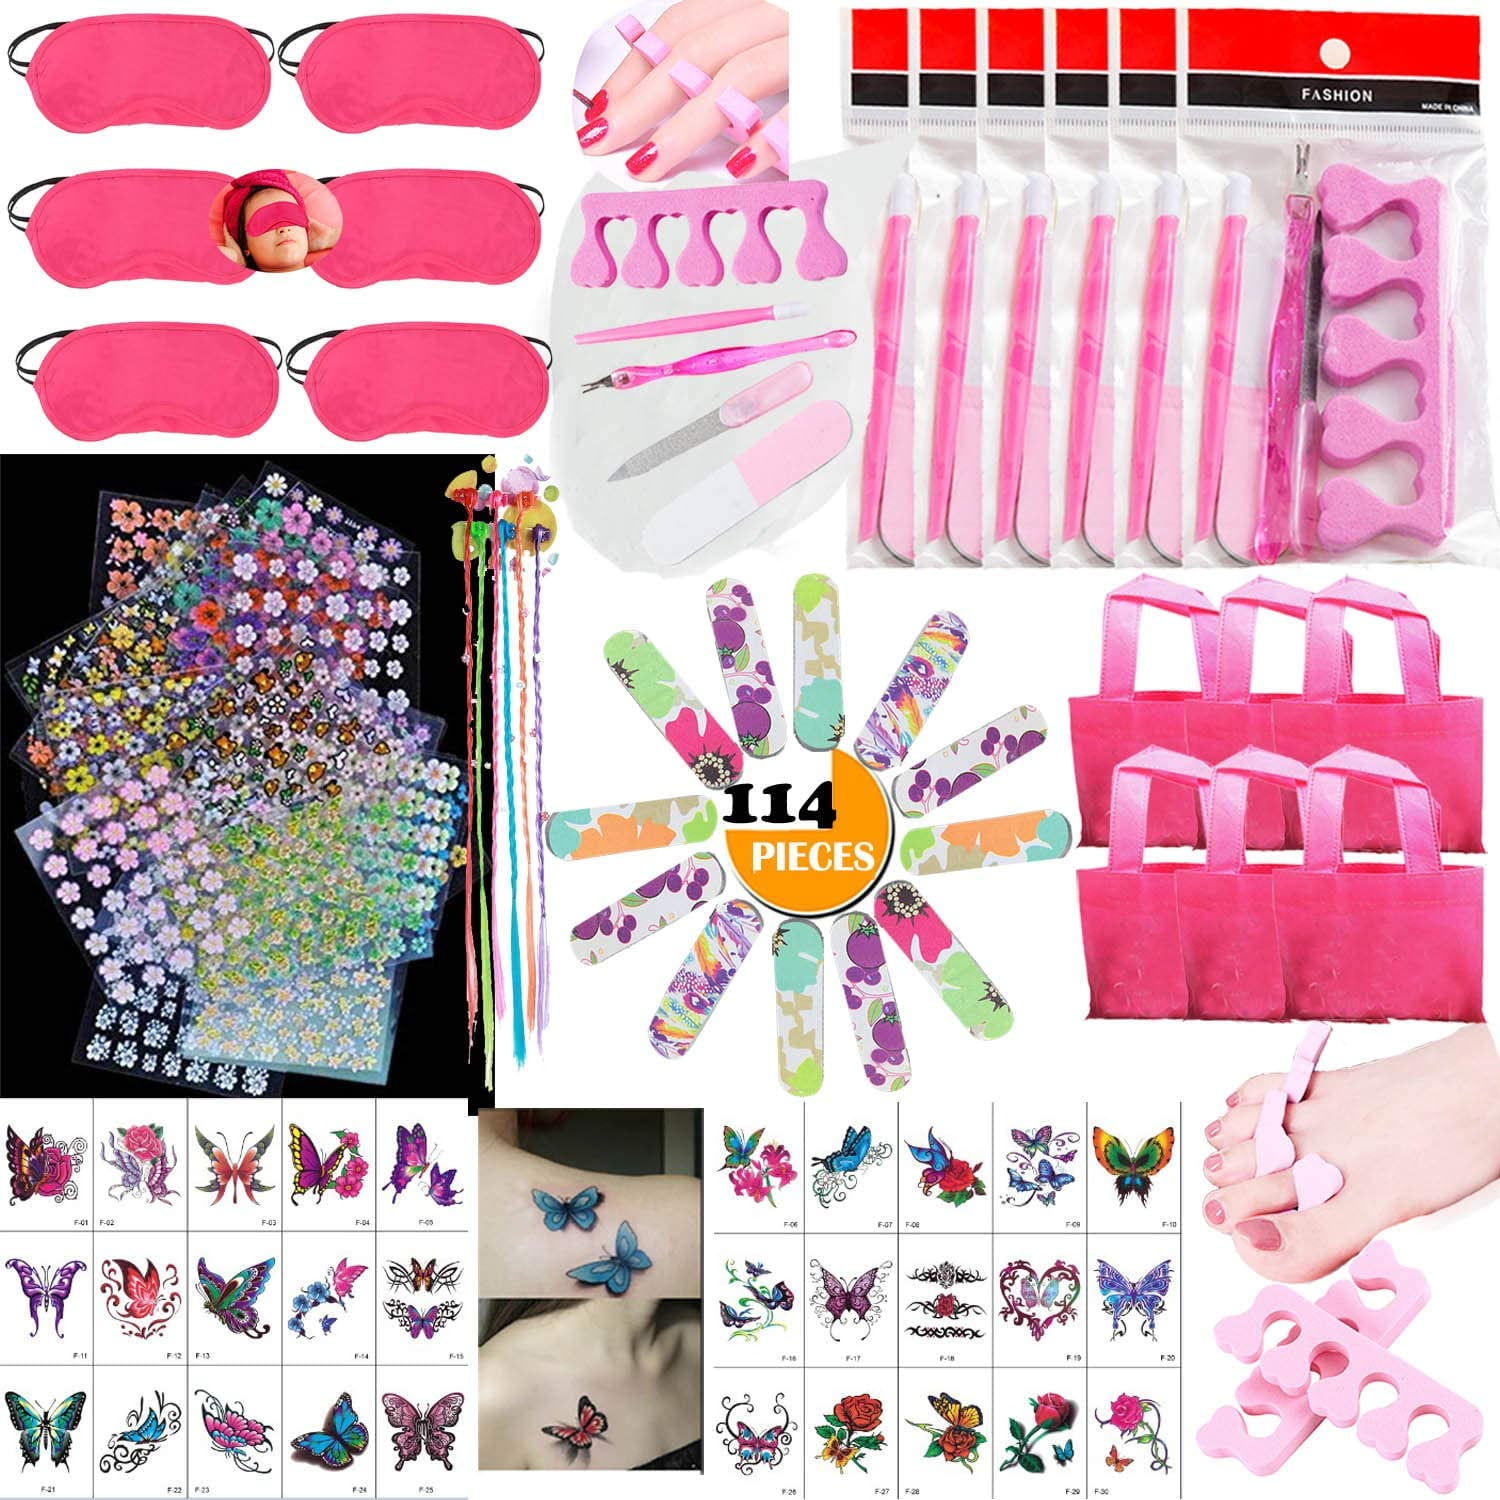 Fabric Manicure Nail Art Girls Teen Sleepover Spa Pamper Party Bags 7 treats 